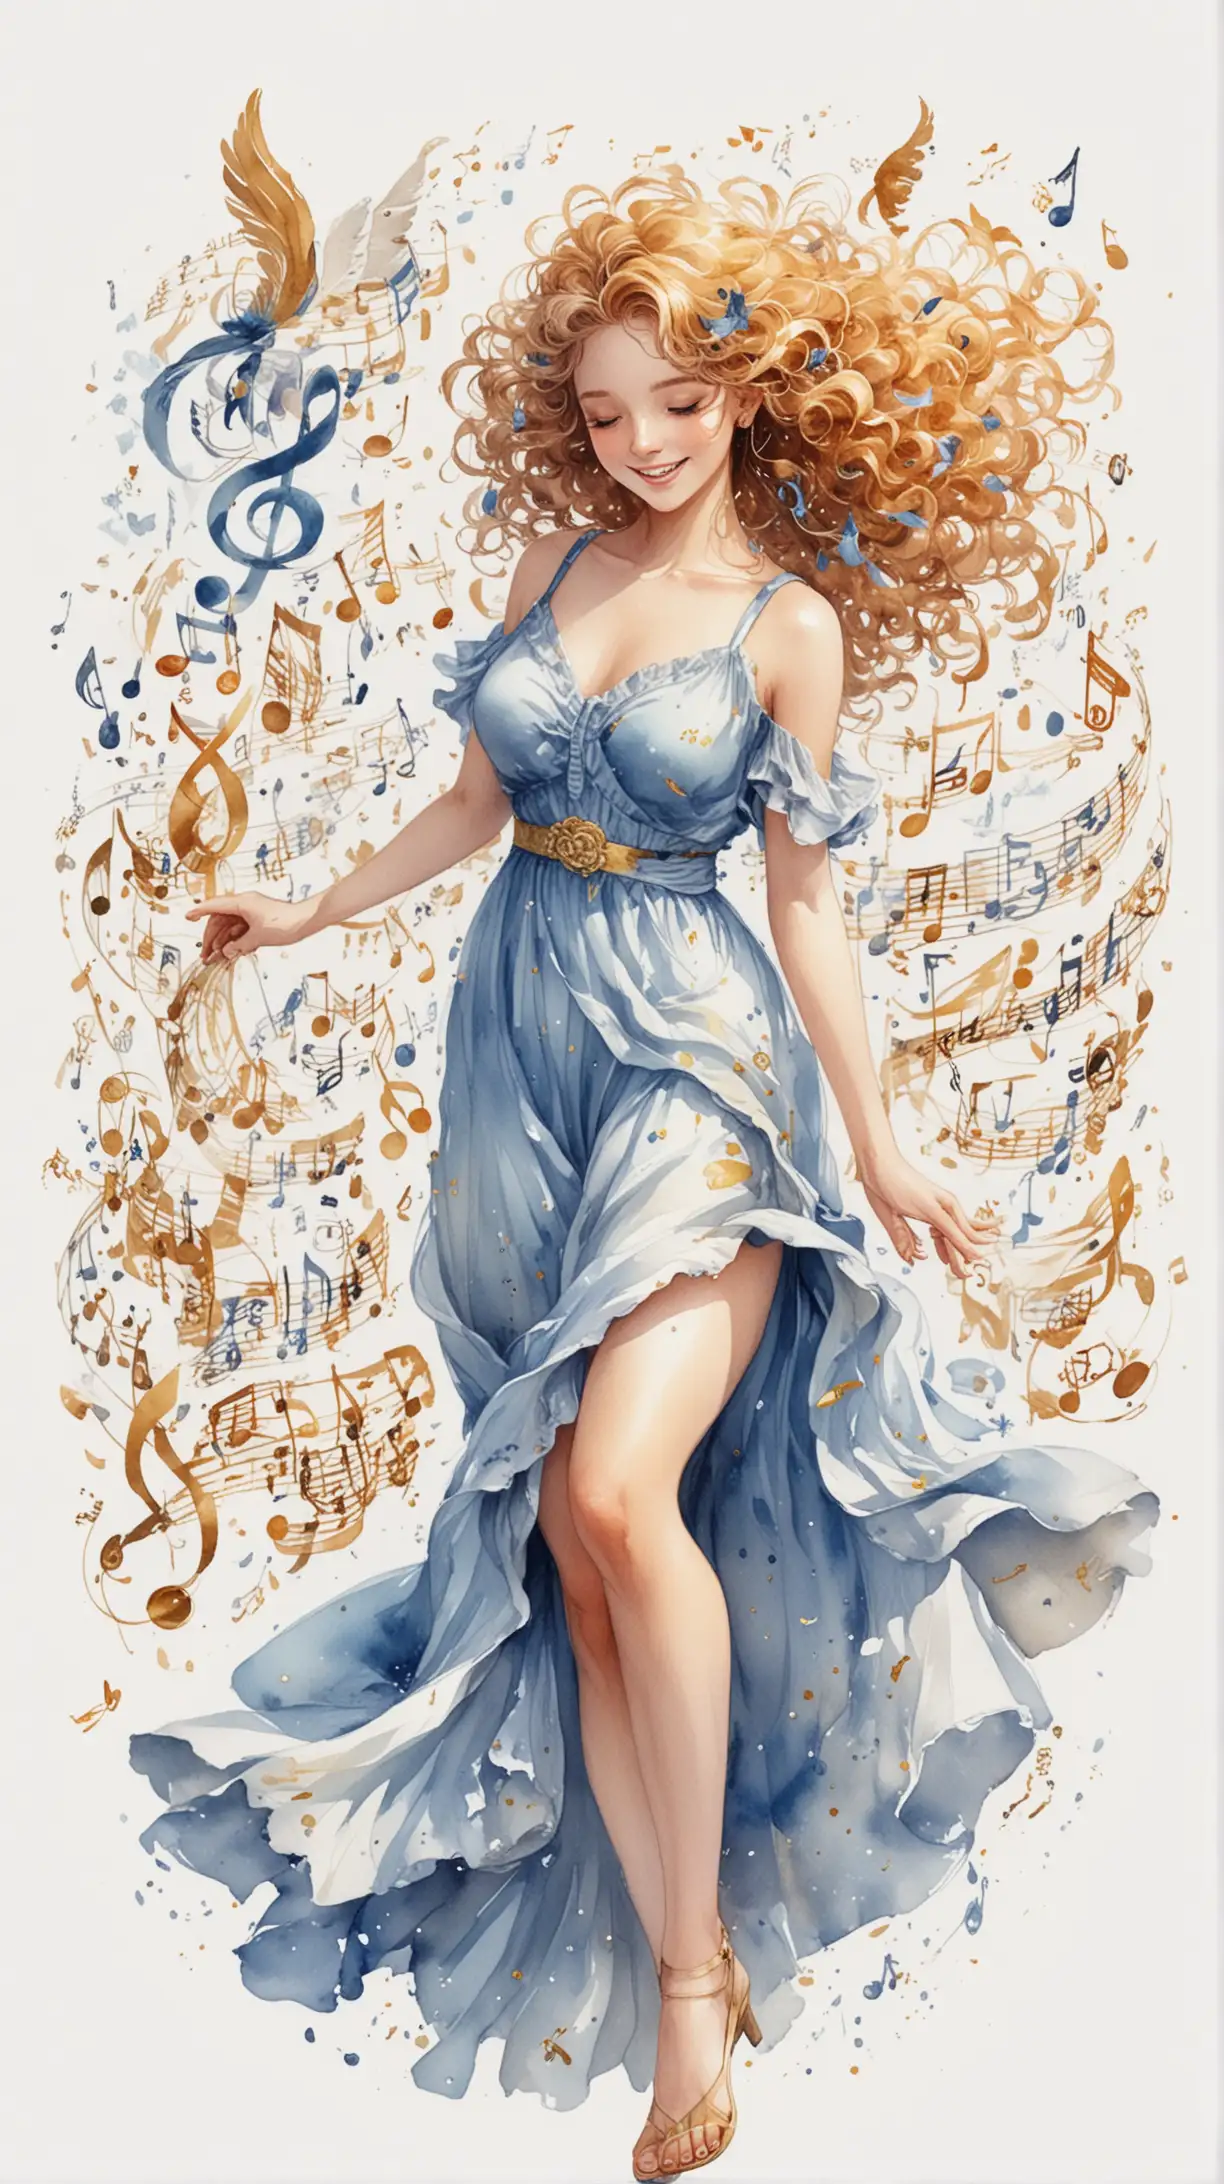 Euterpe the Muse of Music in a Whimsical Anime Style Watercolor